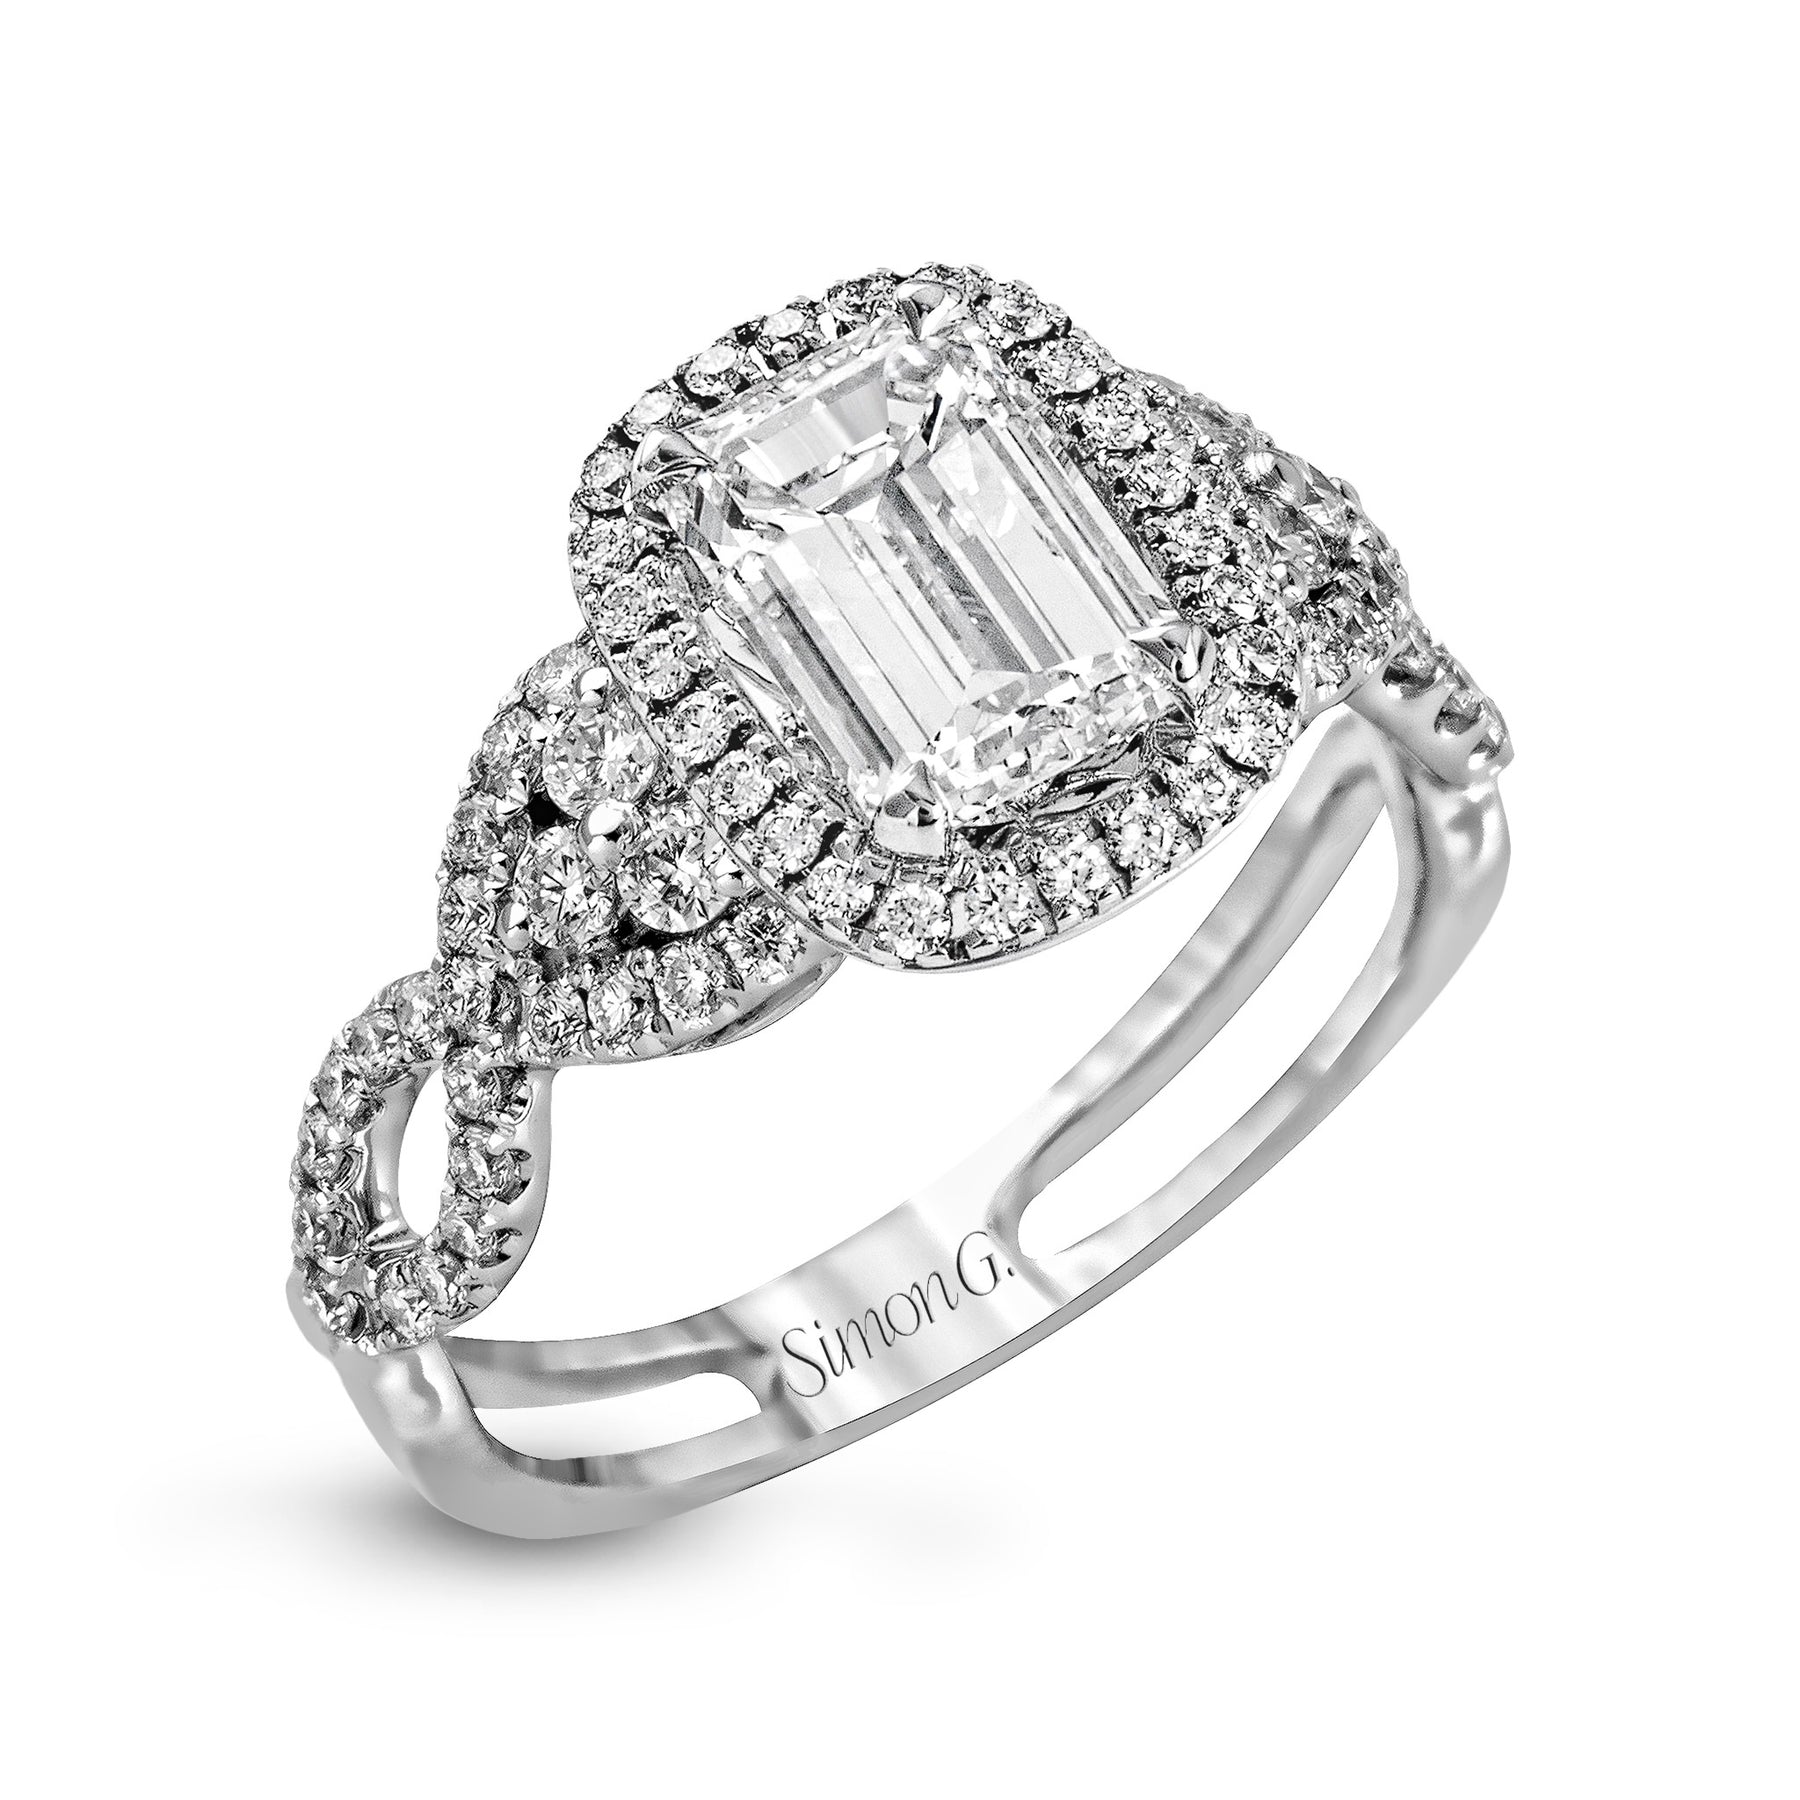 Emerald-Cut Halo Engagement Ring In 18k Gold With Diamonds TR160-EM